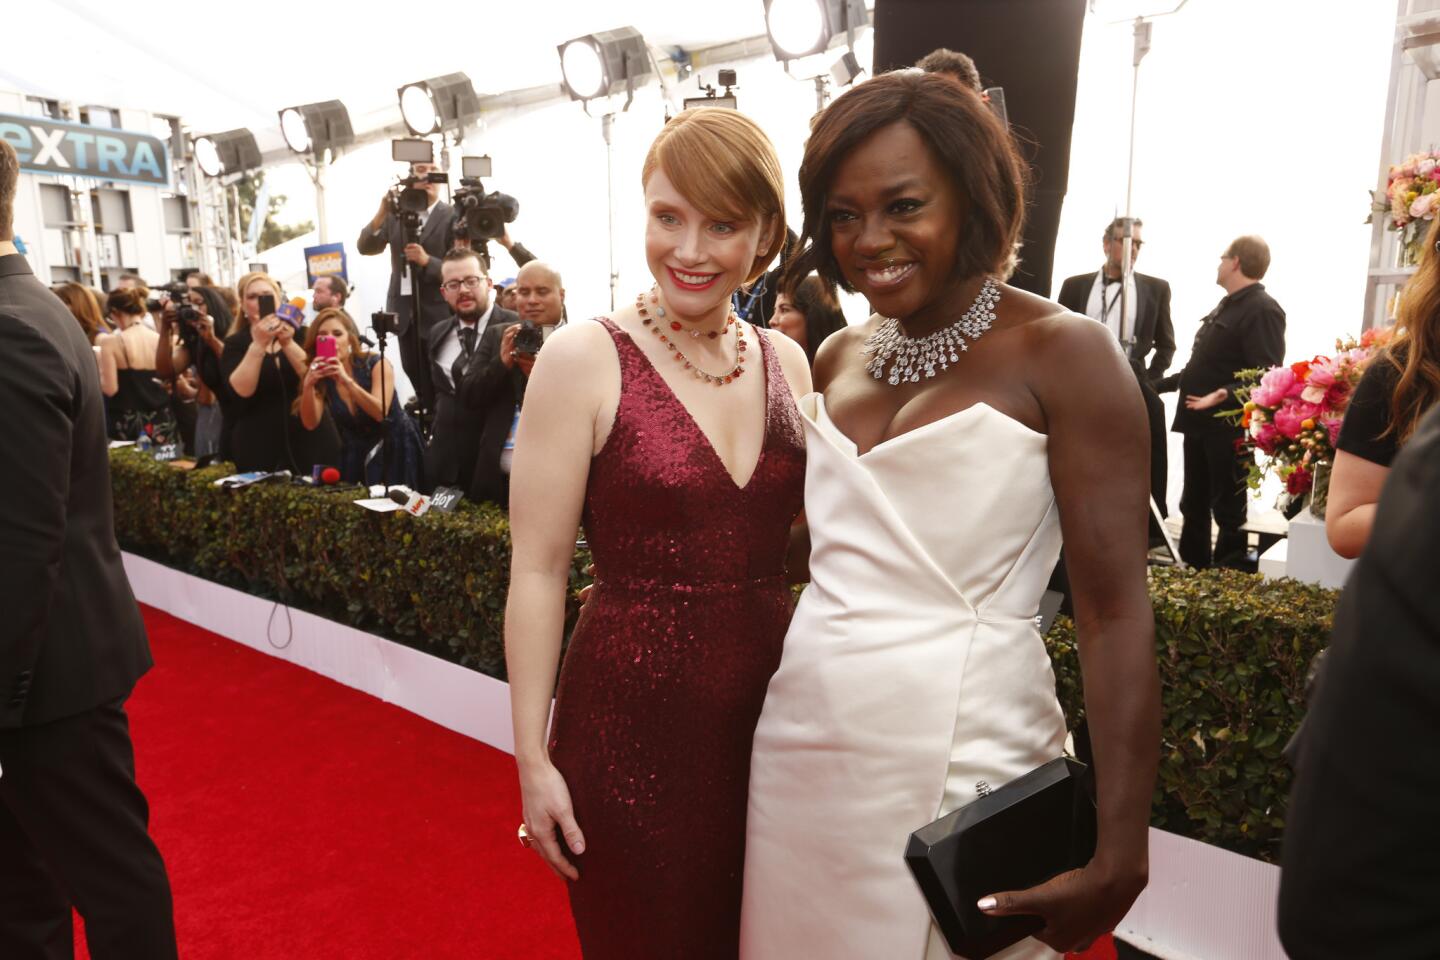 Bryce Dallas Howard, a nominee for "Black Mirror," and Viola Davis, a nominee for "Fences," arrive at the 23rd Screen Actors Guild Awards at the Shrine Auditorium in Los Angeles.